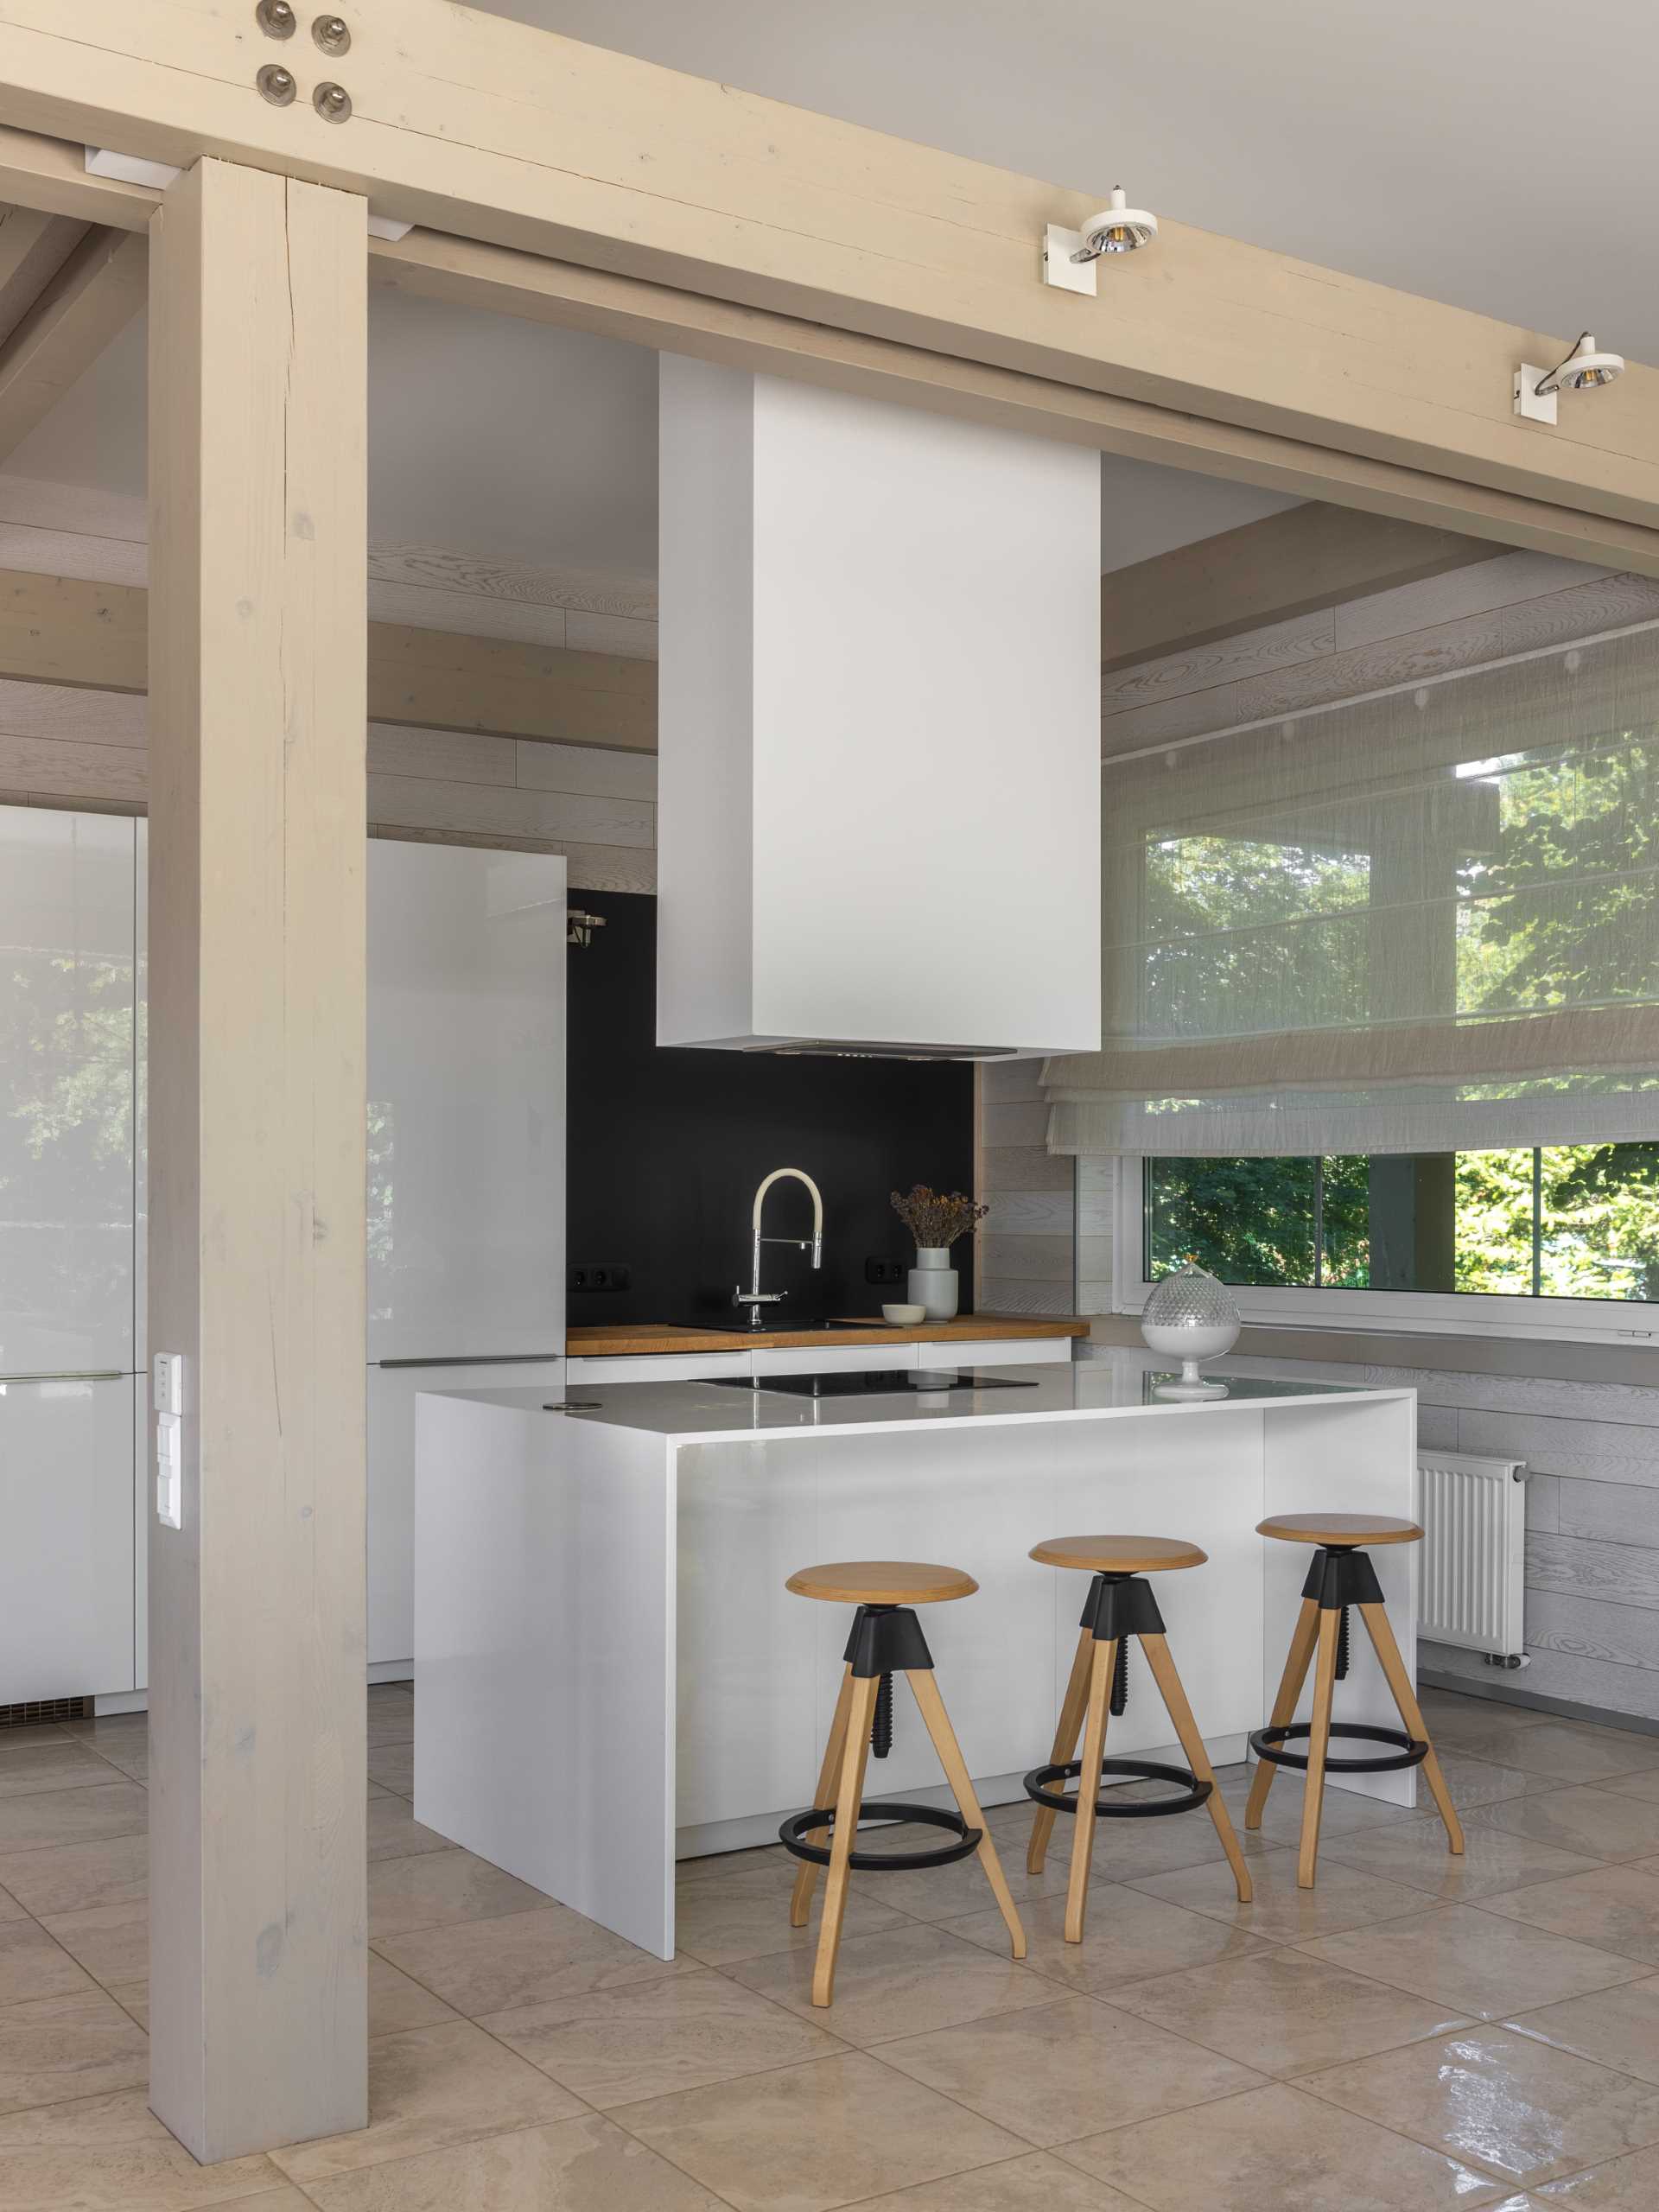 In this kitchen, the white cabinets have been paired with wood accents for a contemporary finish.